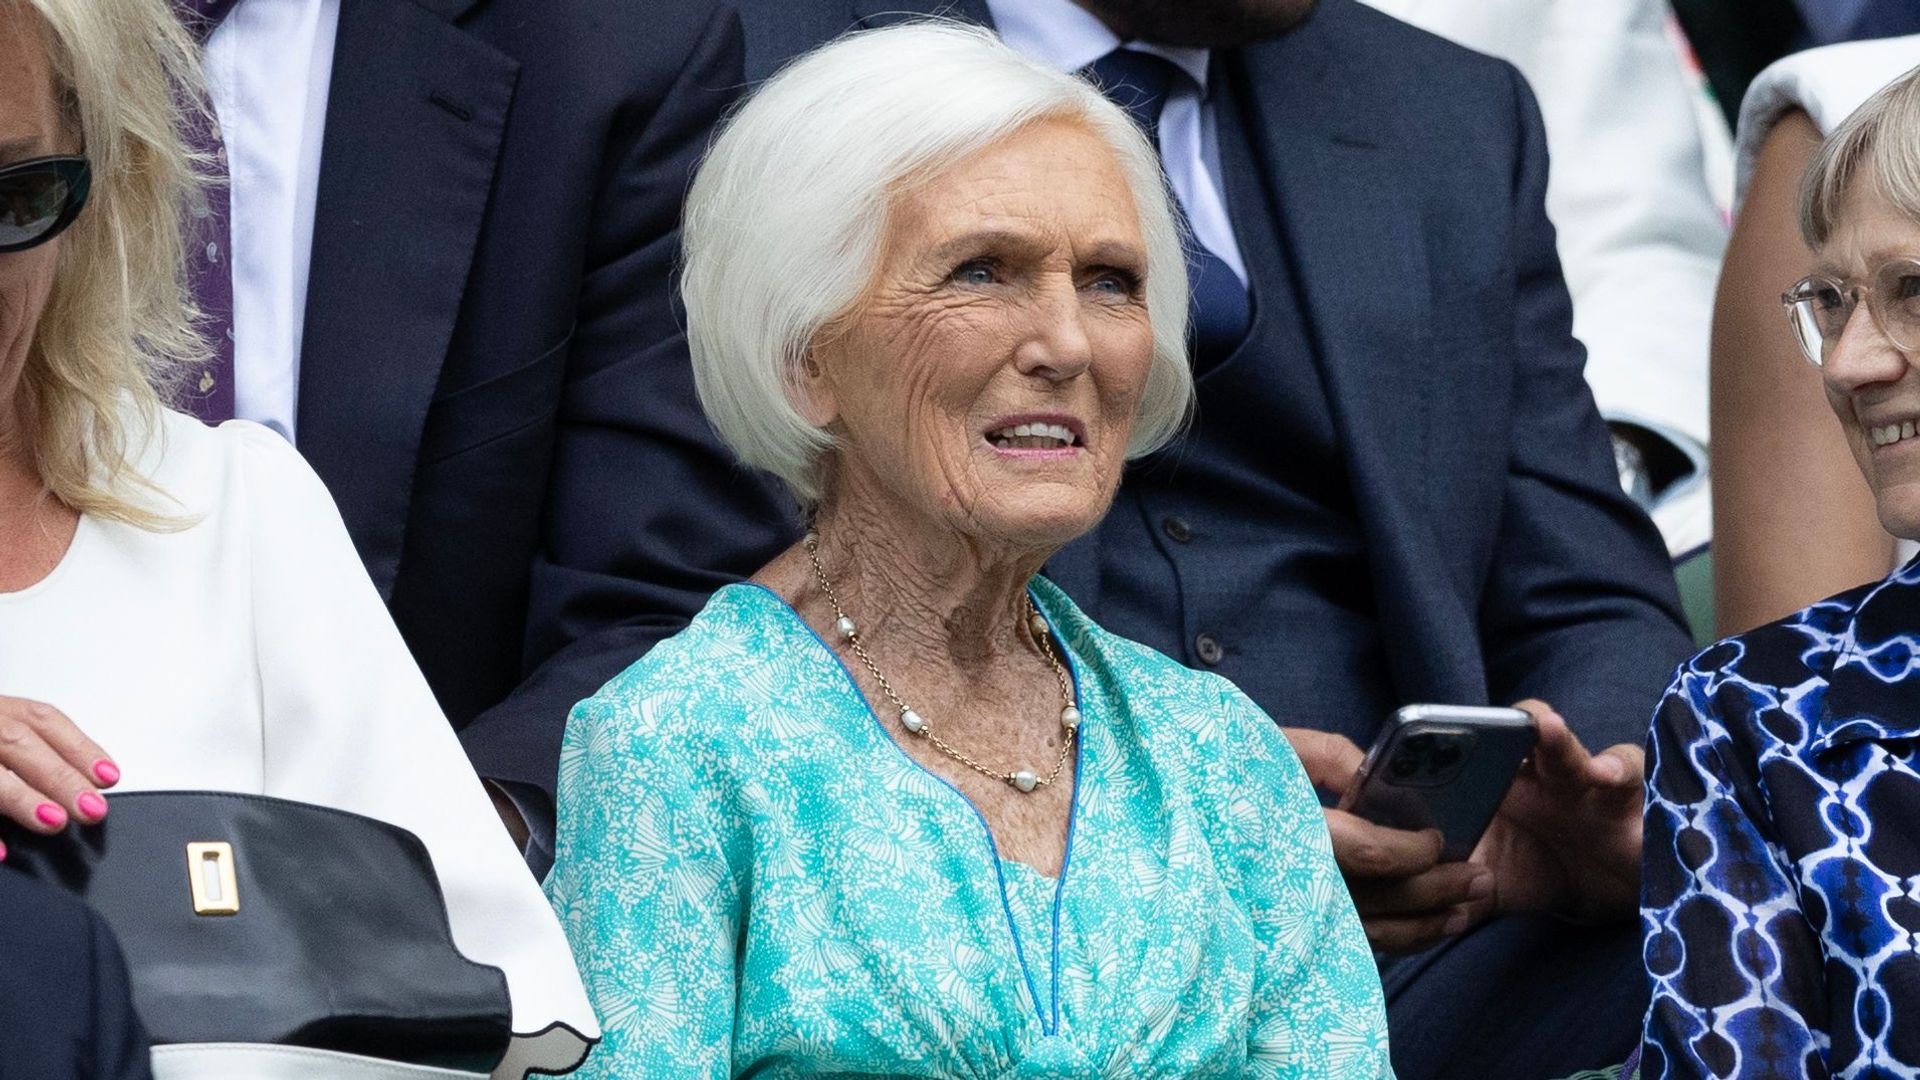 Mary Berry in a turquoise dress at Wimbledon